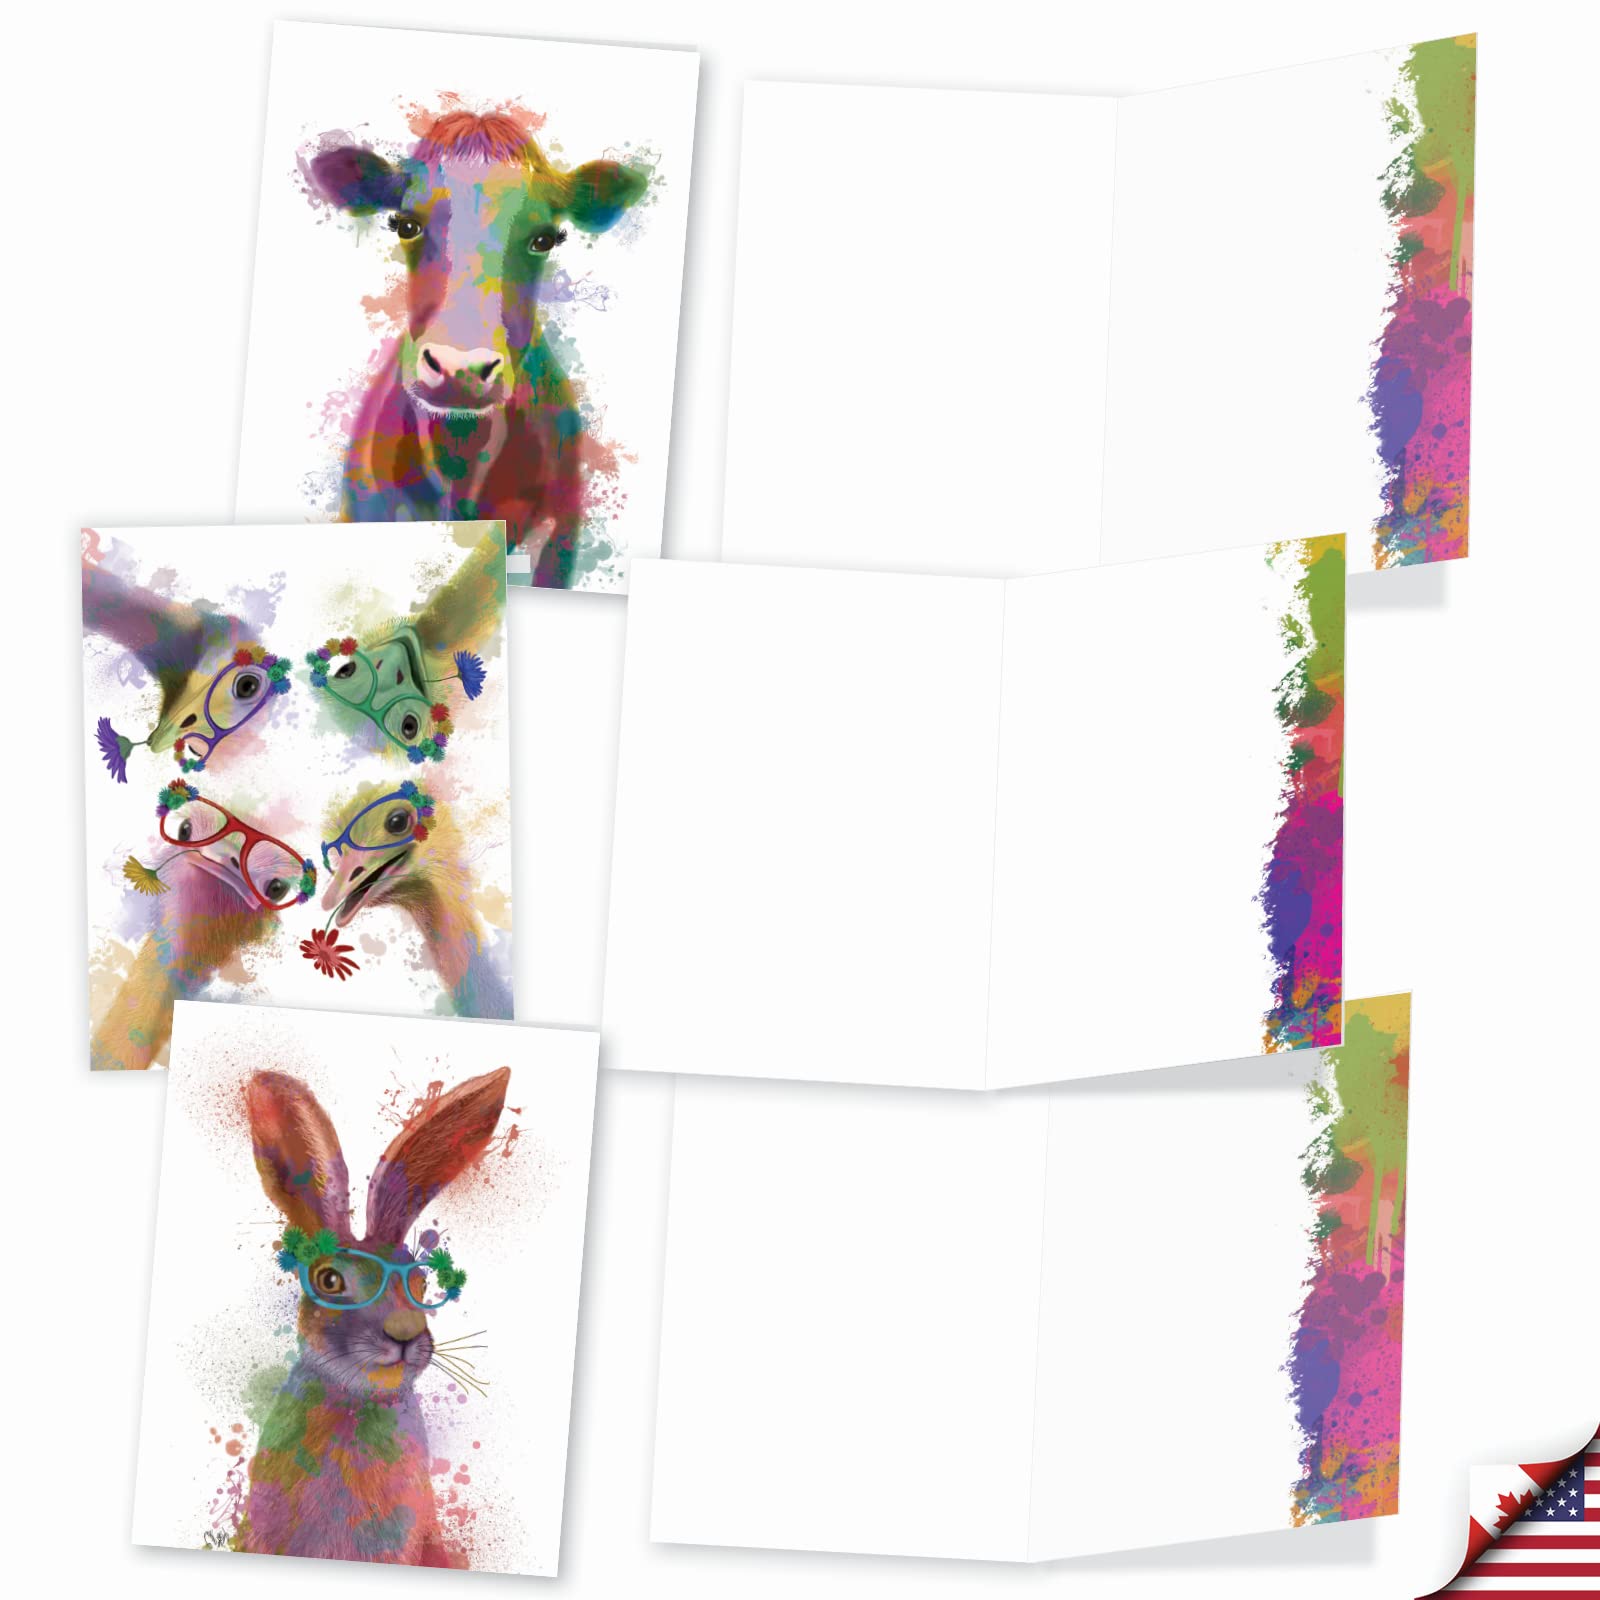 The Best Card Company Assorted Watercolor Blank Greeting Card Box Set - Incl. 10 Notecards + Envelopes, 10 Animal Designs for Thank You, Invitations, More - Funky Rainbow Wildlife M4948OCB-B1x10